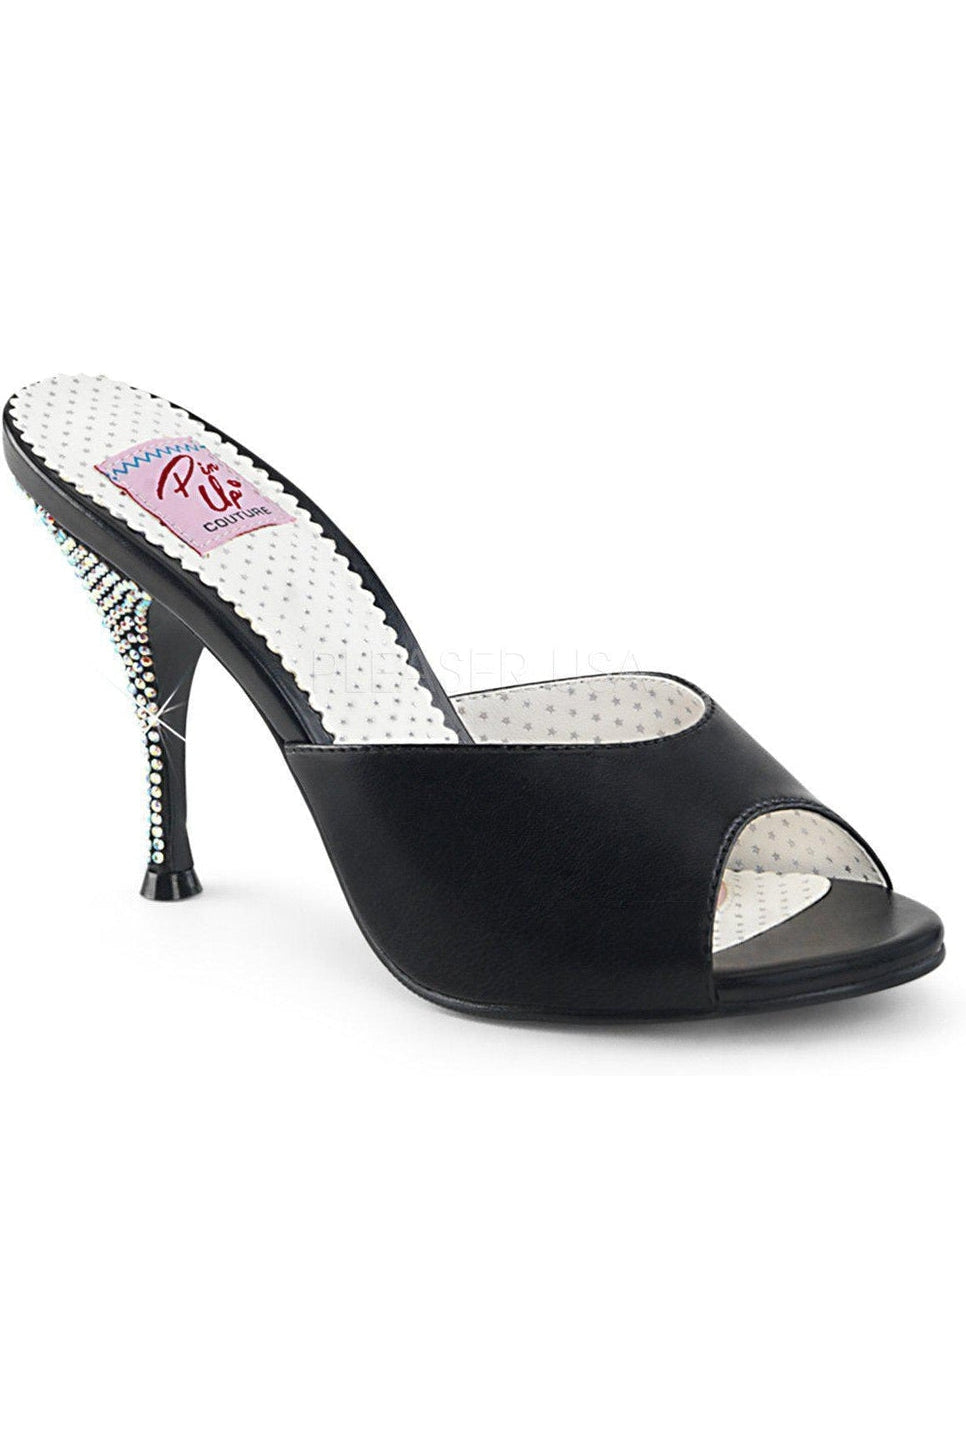 MONROE-05 Slide | Black Faux Leather-Pin Up Couture-SEXYSHOES.COM